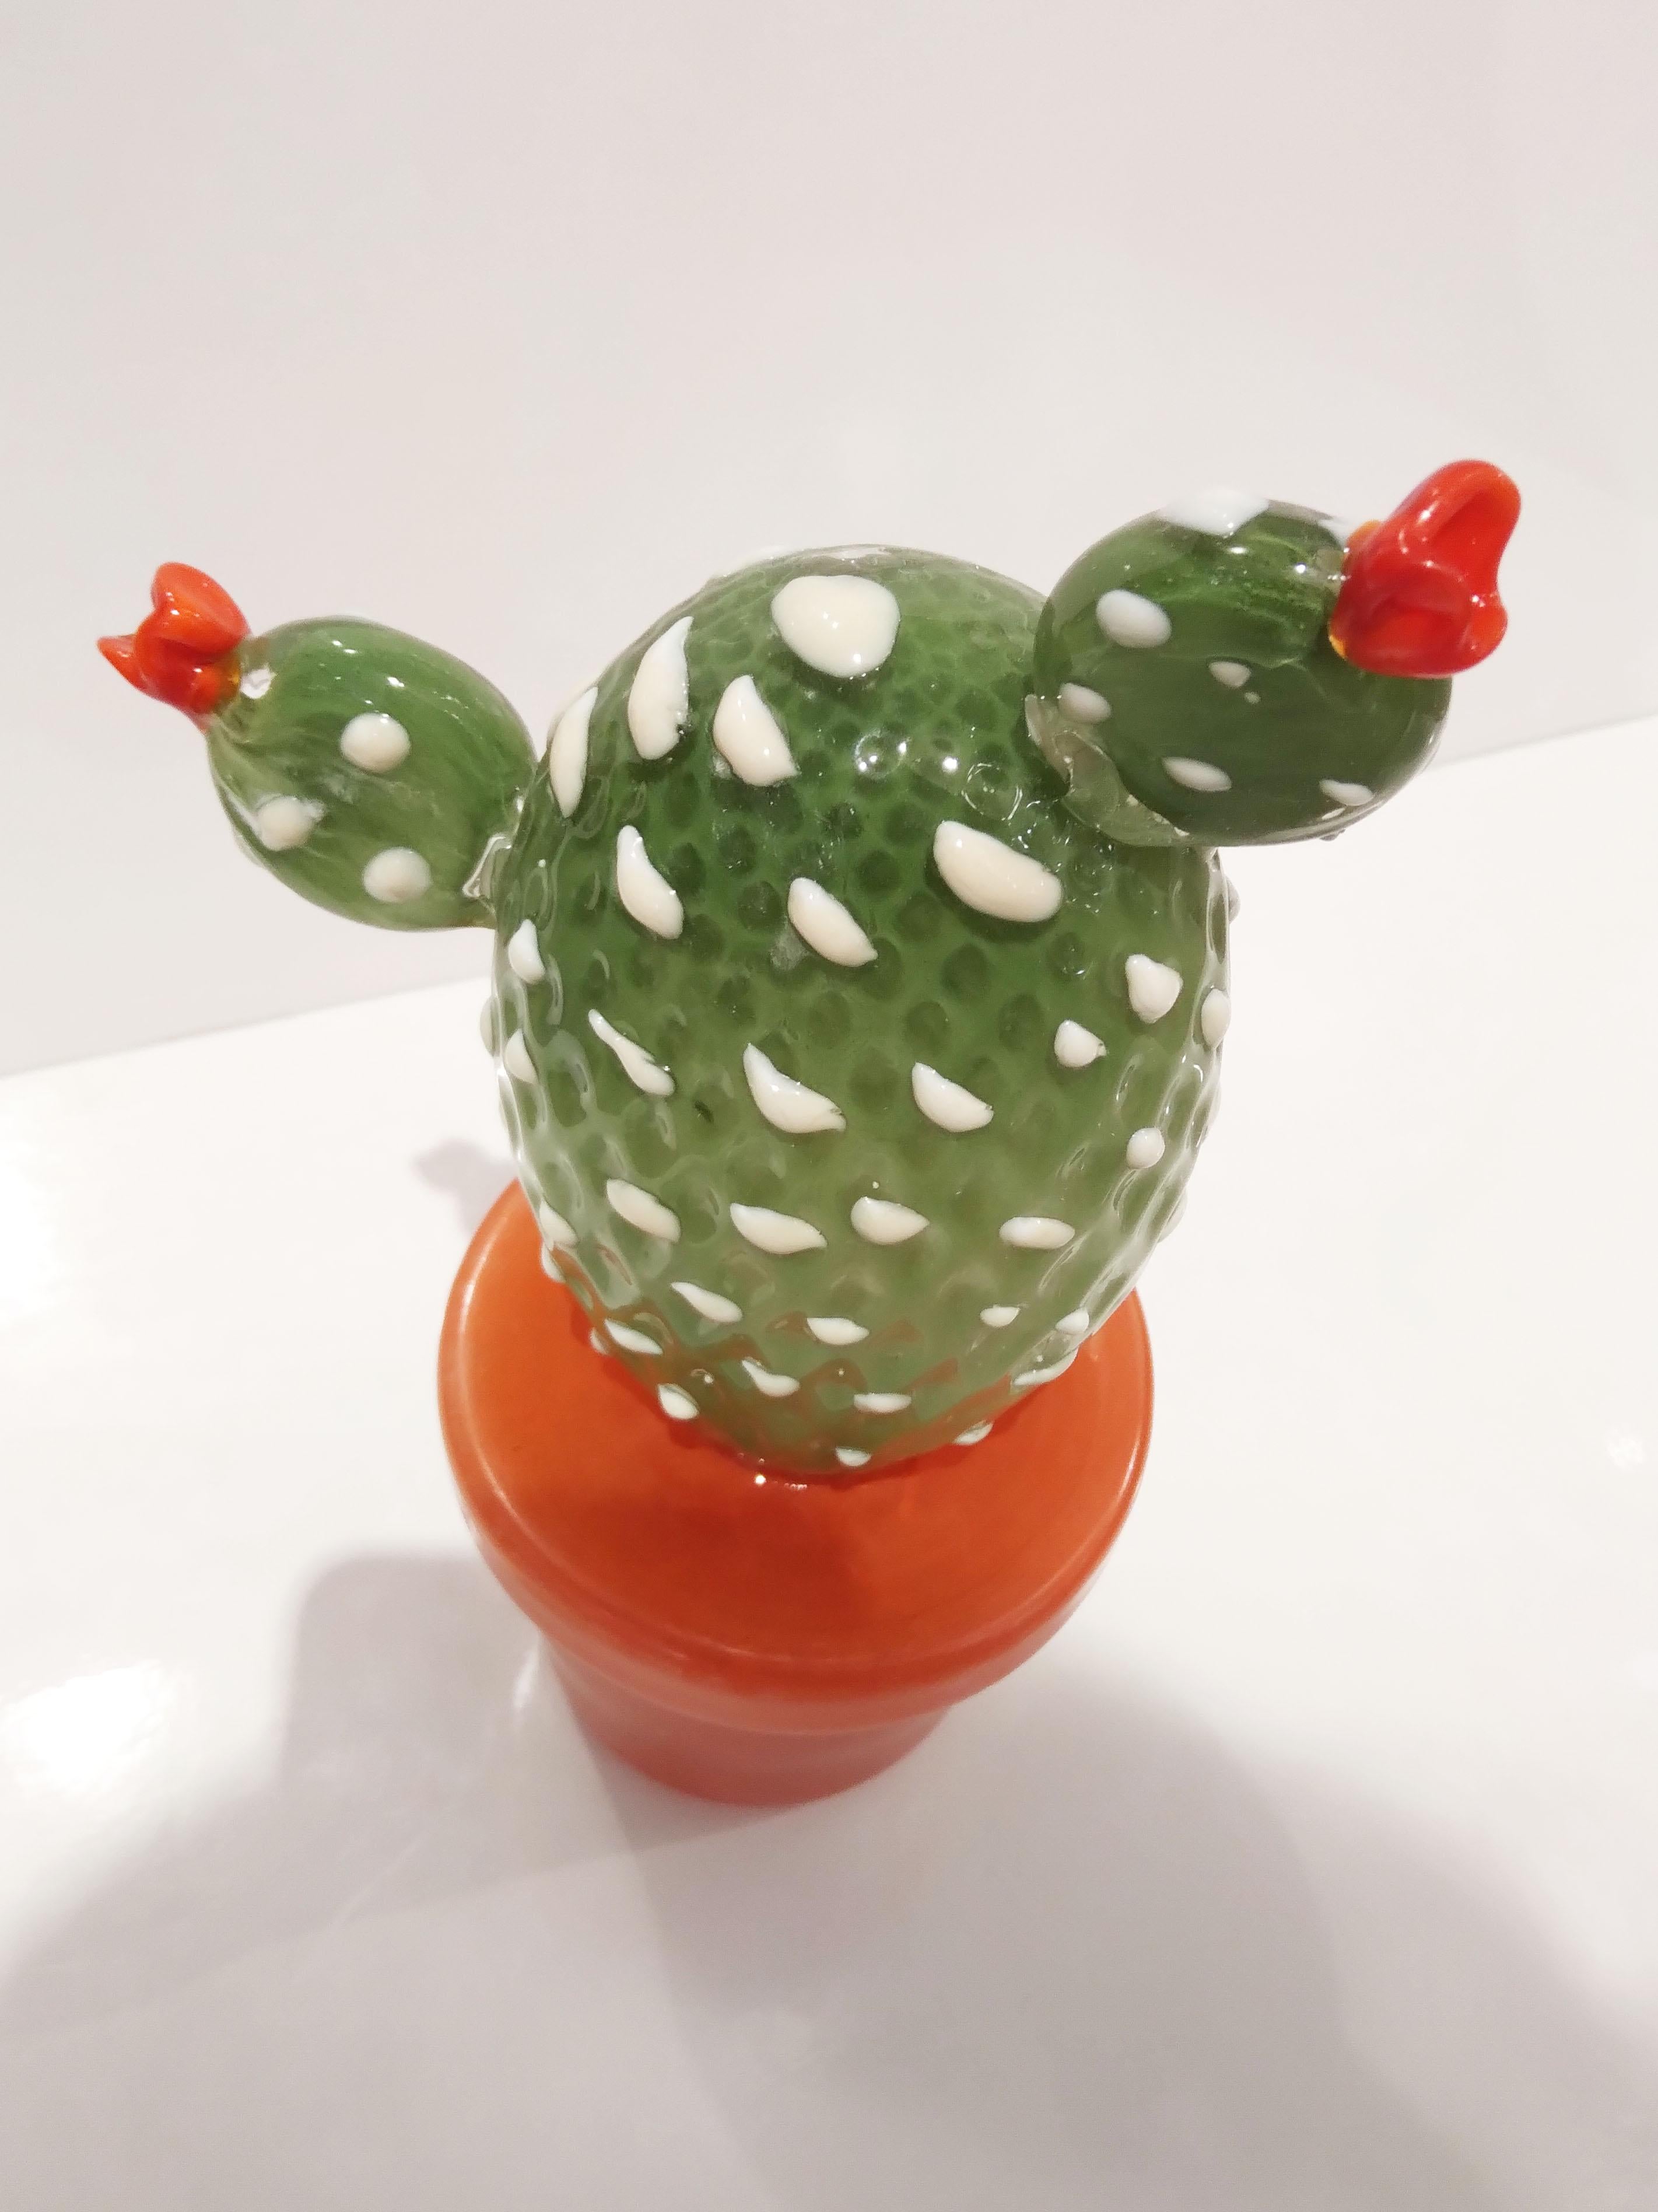 Contemporary Italian highly collectible potted glass cactus of limited edition, entirely handcrafted in Murano, with modern Minimalist design blown by Fornace Mian, in a lifelike organic modernist shape, in lime green honeycomb textured Murano glass